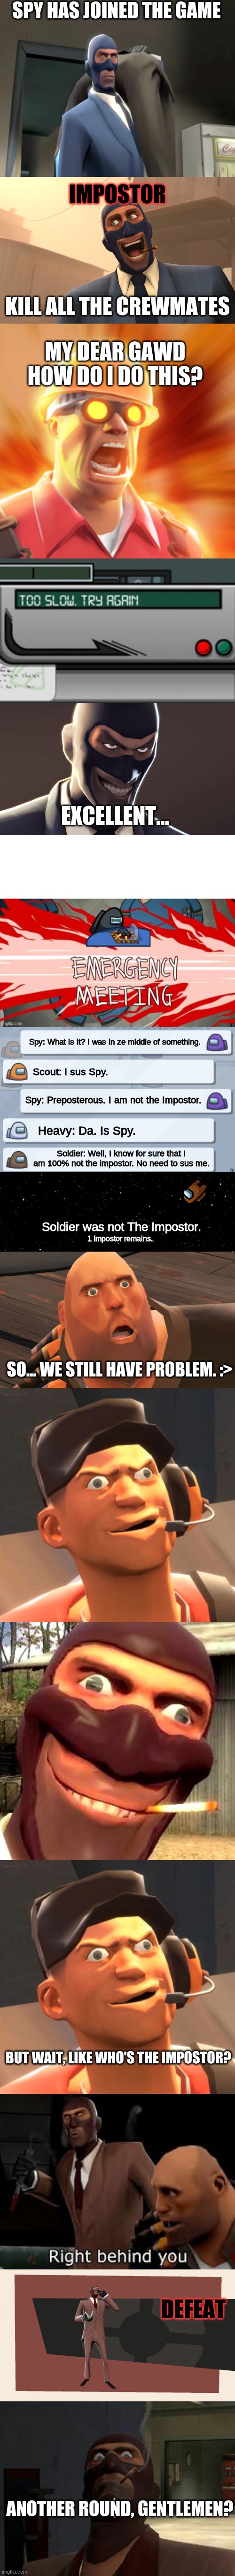 This was an actual round of among us. It was just me, Heavy, Soldier, and Scout after that last meeting because everyone else di |  SPY HAS JOINED THE GAME; IMPOSTOR; KILL ALL THE CREWMATES; MY DEAR GAWD HOW DO I DO THIS? EXCELLENT... Spy: What is it? I was in ze middle of something. Scout: I sus Spy. Spy: Preposterous. I am not the Impostor. Heavy: Da. Is Spy. Soldier: Well, I know for sure that I am 100% not the impostor. No need to sus me. Soldier was not The Impostor. 1 Impostor remains. SO... WE STILL HAVE PROBLEM. :>; BUT WAIT, LIKE WHO'S THE IMPOSTOR? DEFEAT; ANOTHER ROUND, GENTLEMEN? | image tagged in gentlemen tf2 spy,success spy tf2,tf2 engineer,card swipe among us,tf2 spy face,emergency meeting among us black crew mate | made w/ Imgflip meme maker